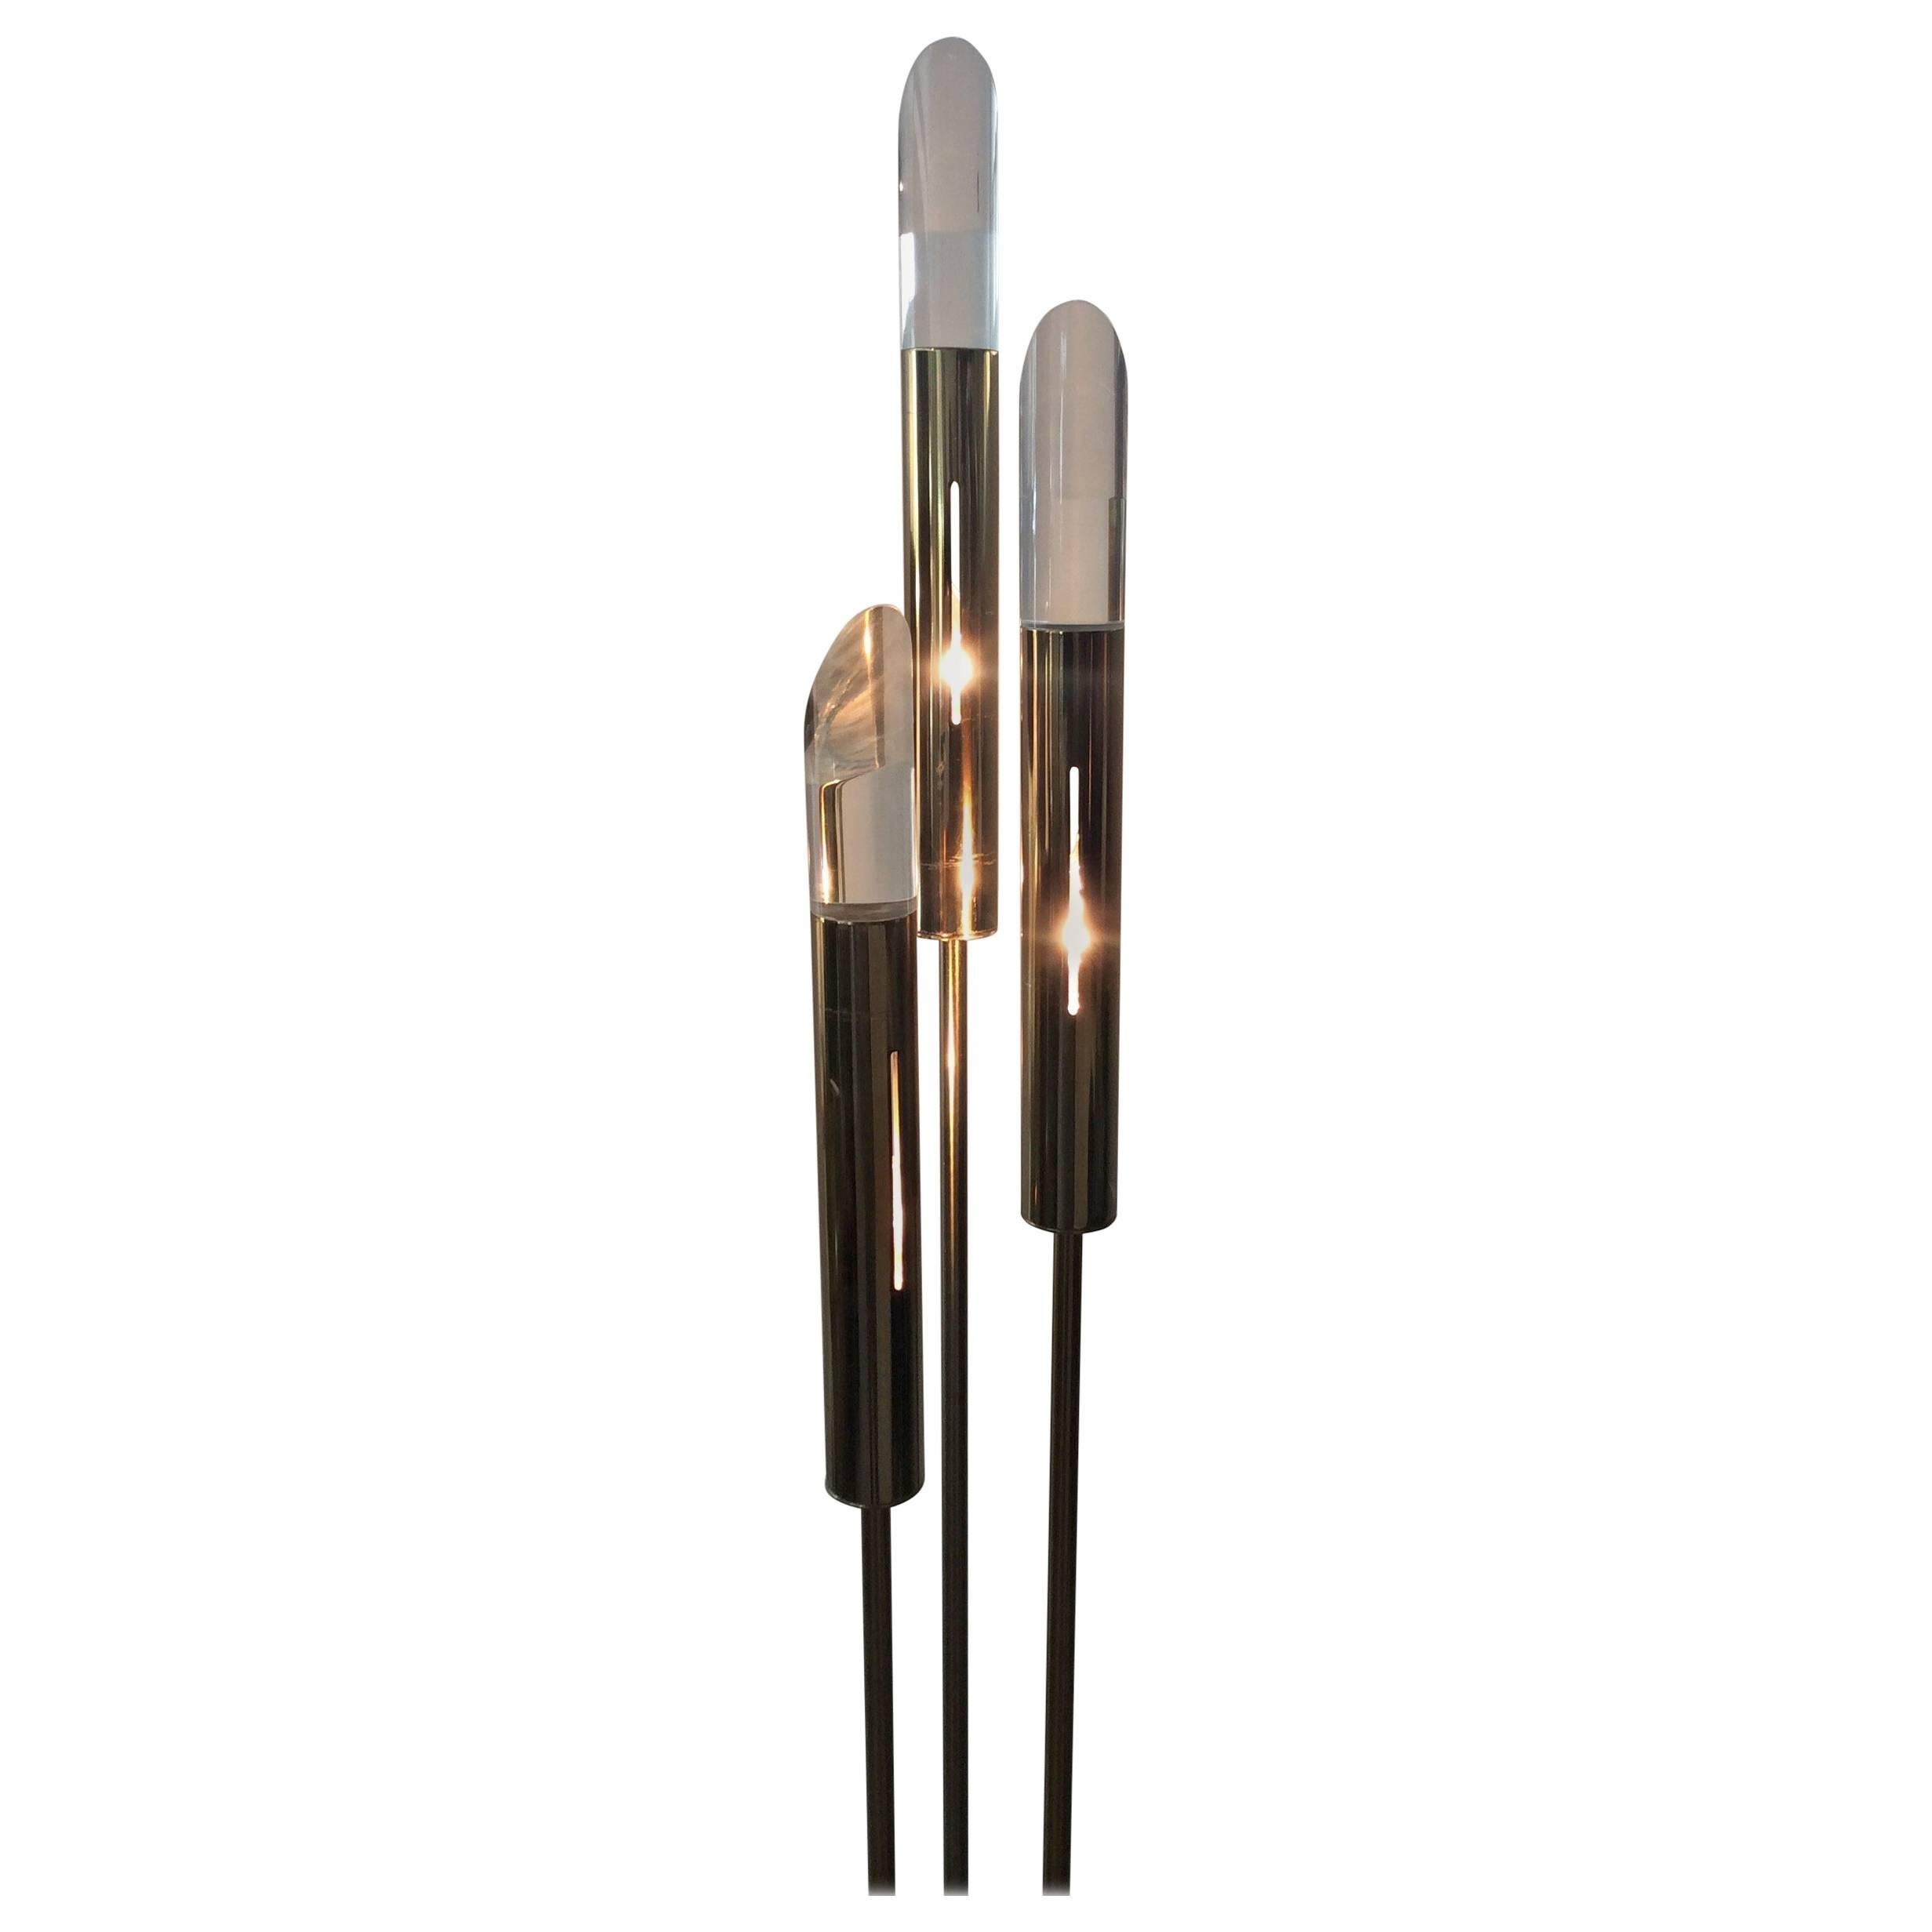 Your looking at this modern brass and Lucite floor lamp very much in the style of Hollis Jones. The base plate is a round metal disc plated in brass fin. The 3 staggering height center metal rods are also plated in brass. The bulb housing sleeve